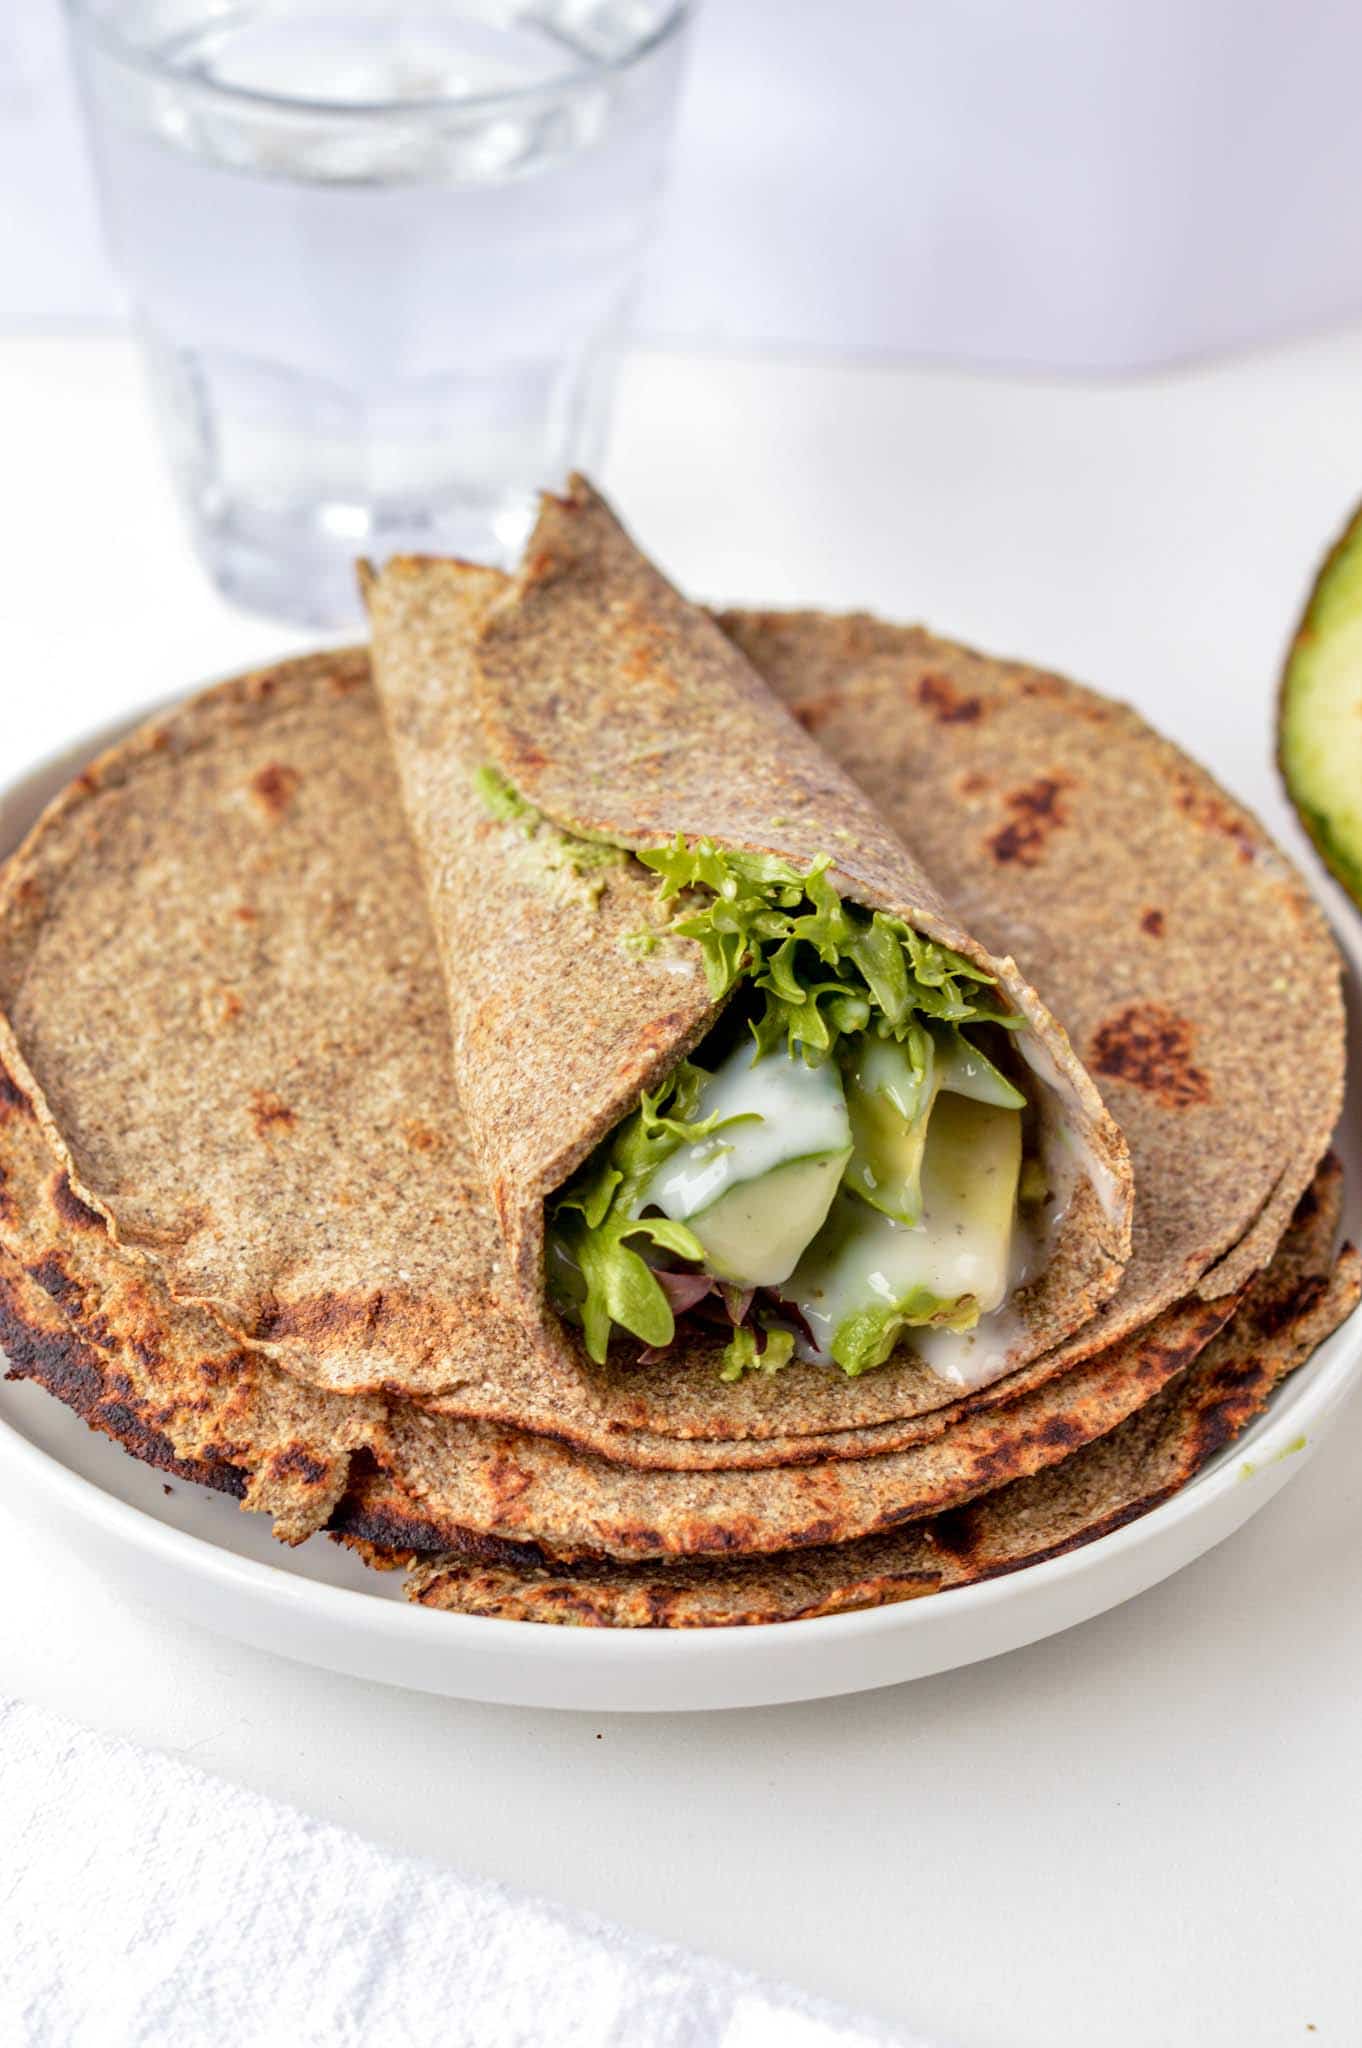 Keto Tortillas Filled With Low-Carb Ingredients